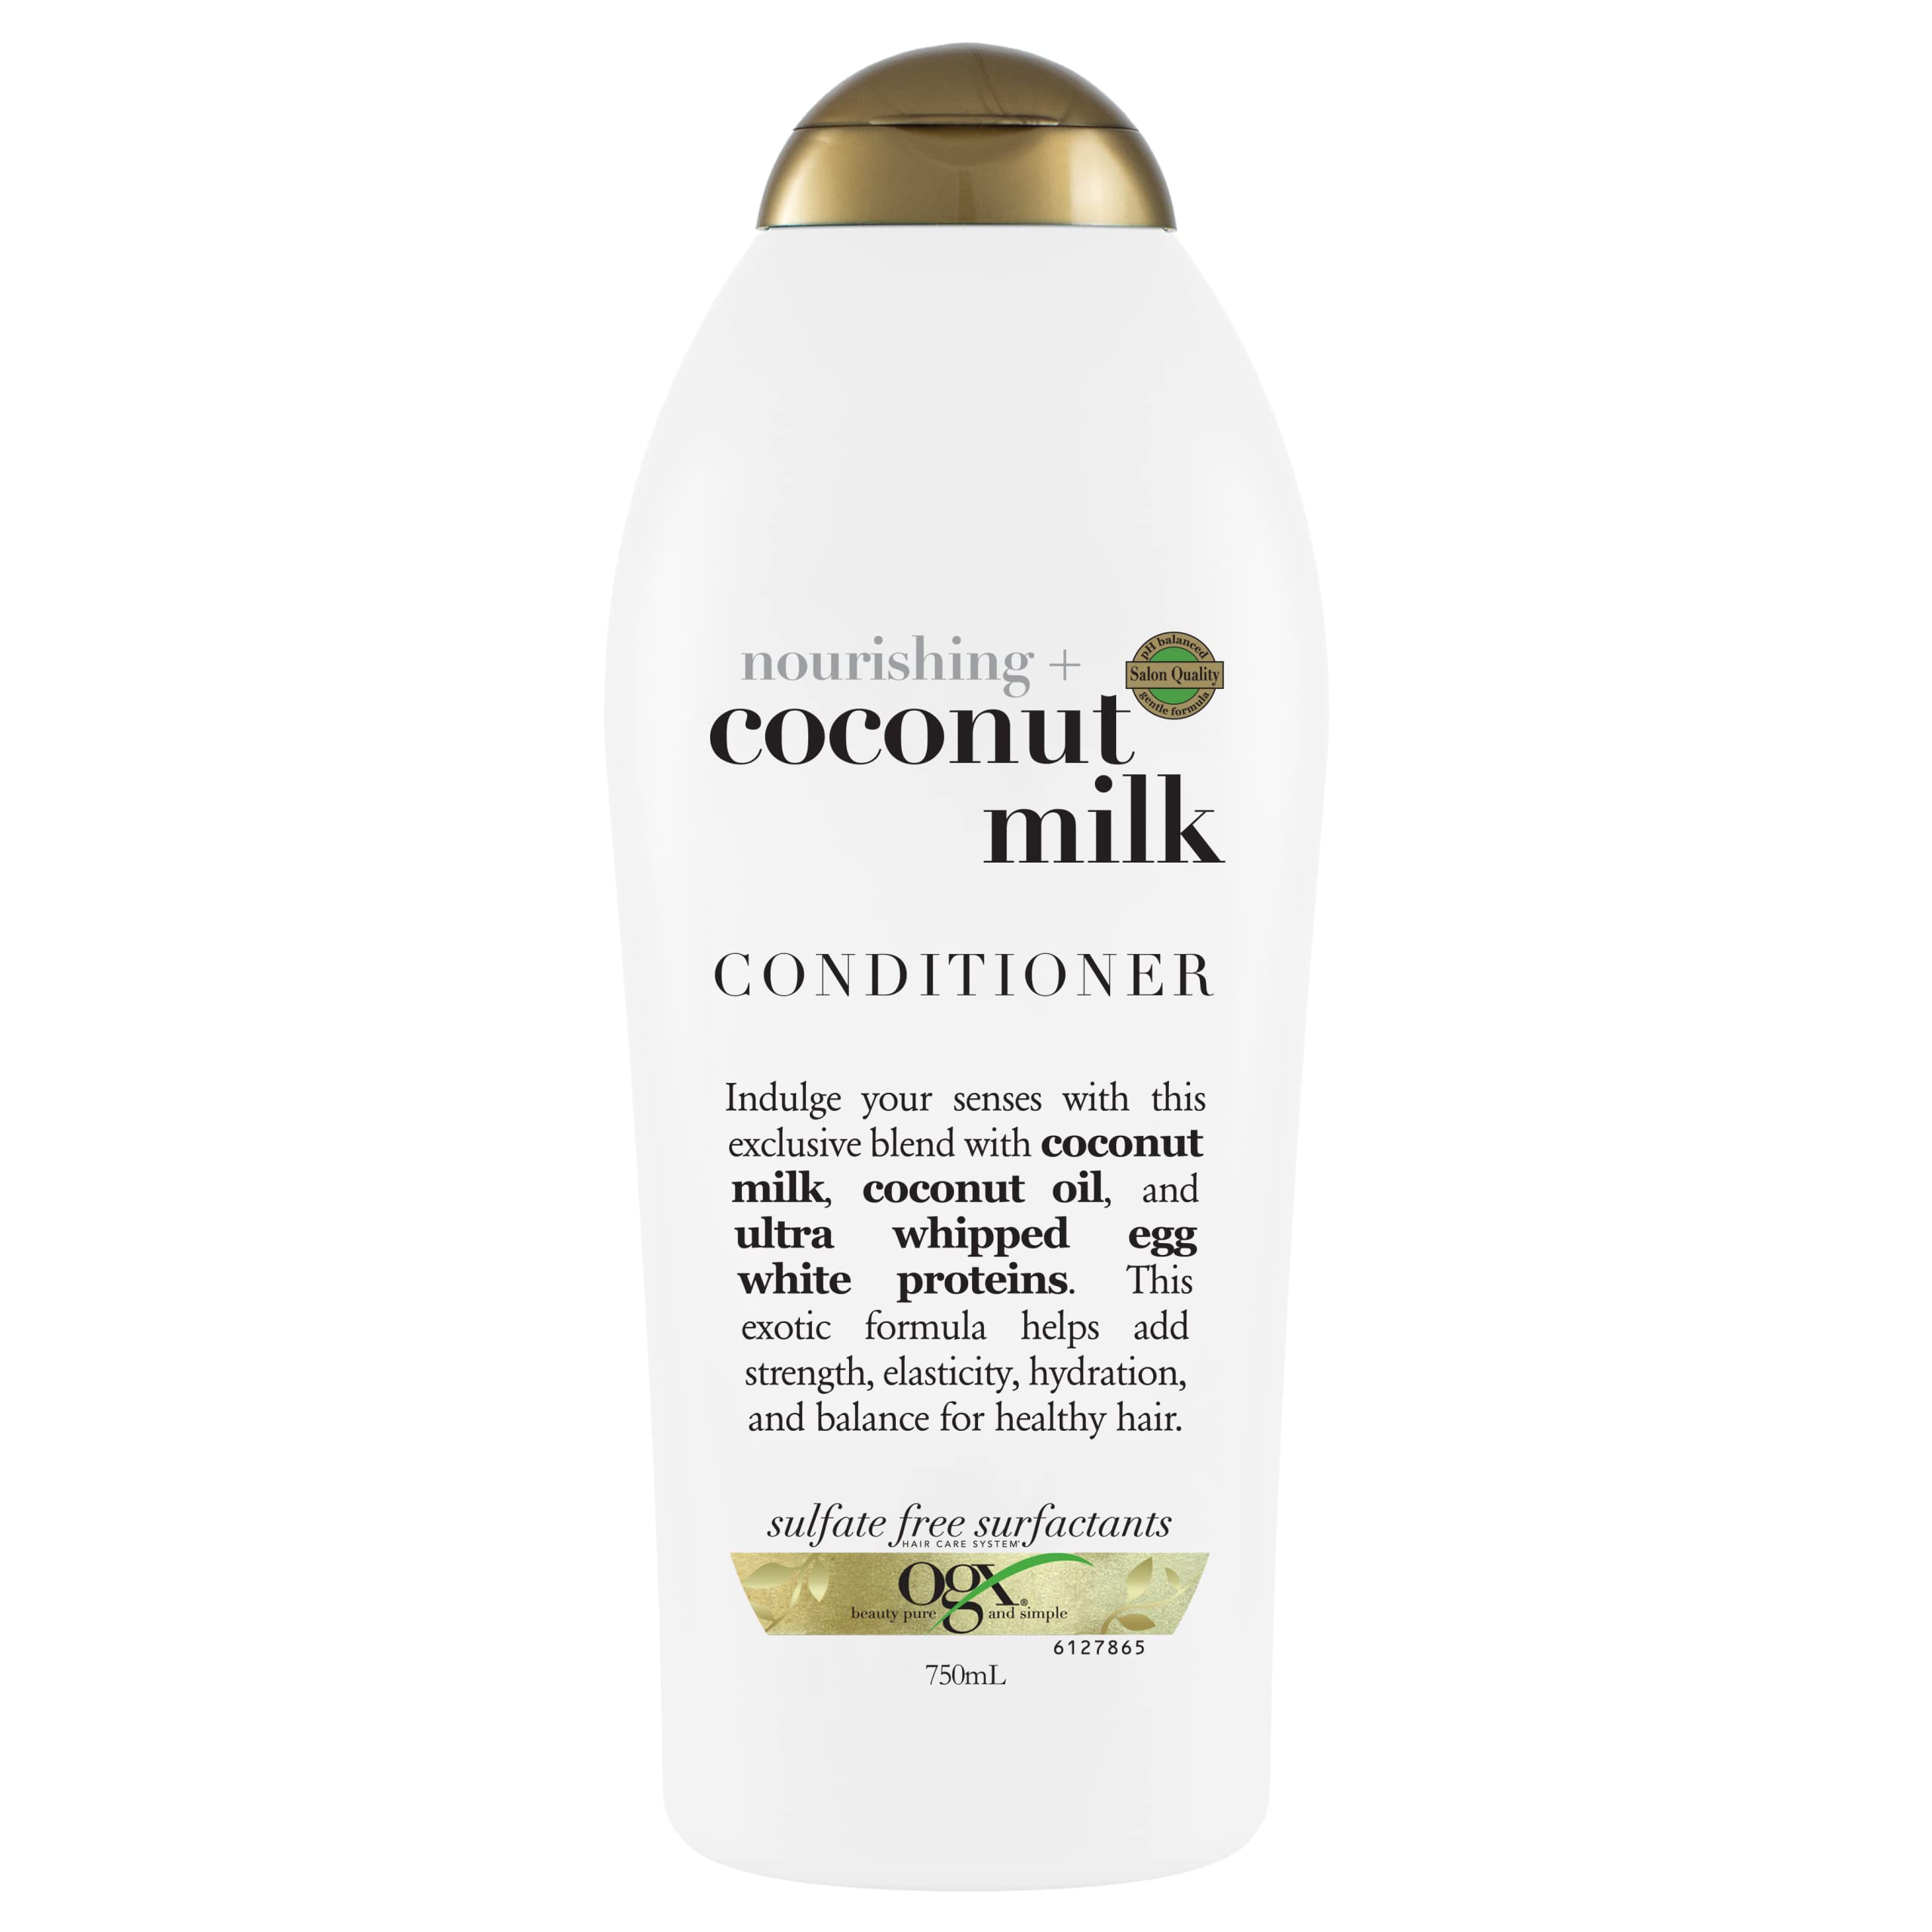 OGX Nourishing + Coconut Milk Moisturizing Conditioner for Strong & Healthy Hair, with Coconut Milk, Coconut Oil & Egg White Protein, Paraben-Free, Sulfate-Free Surfactants, 25.4 fl oz